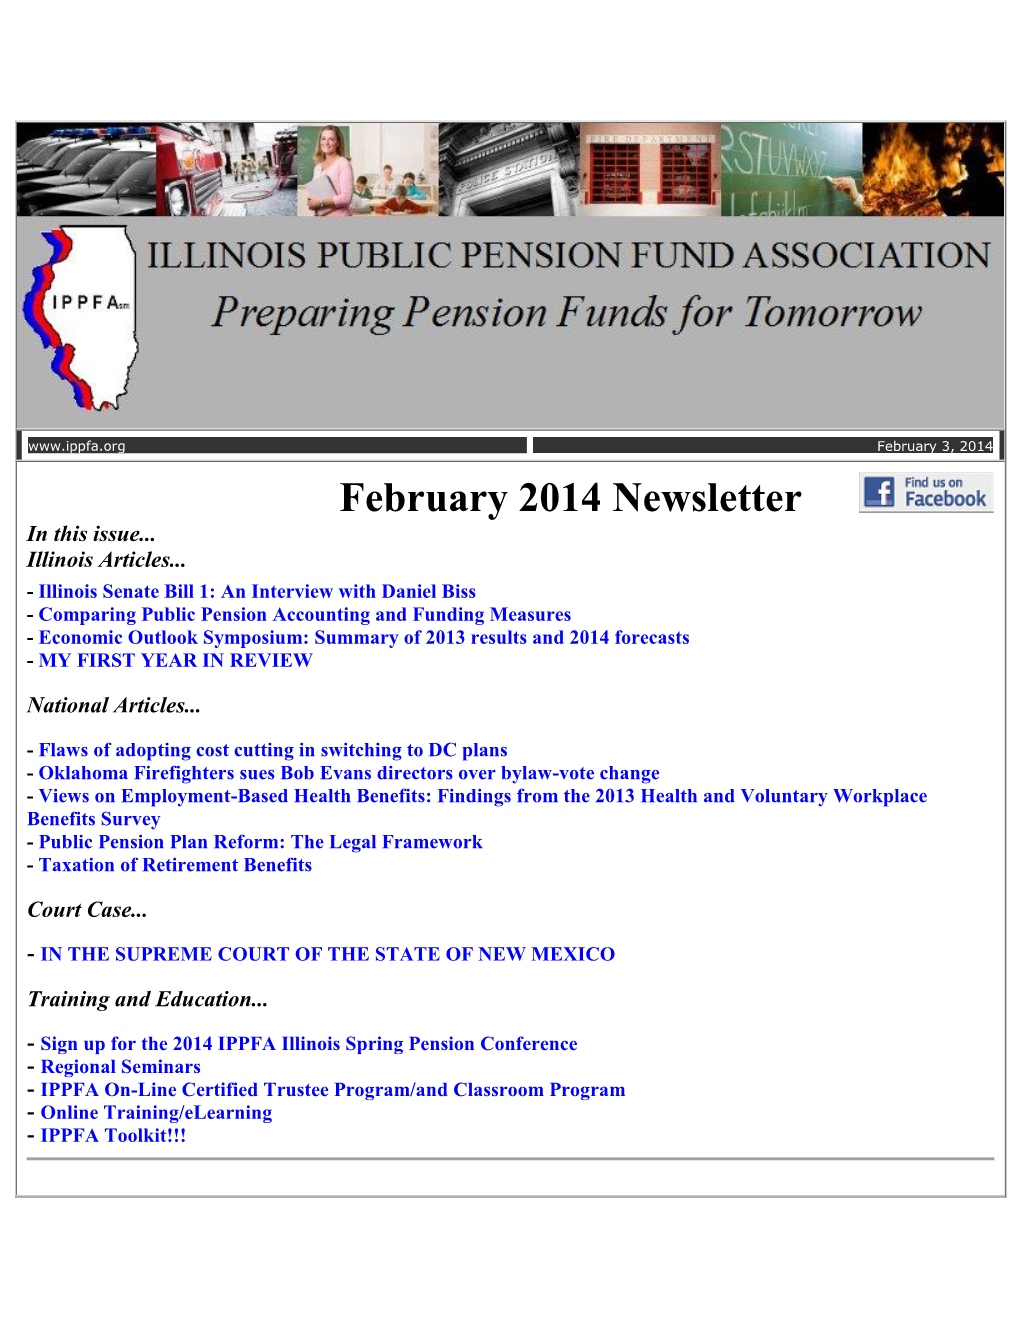 February 2014 Newsletter in This Issue